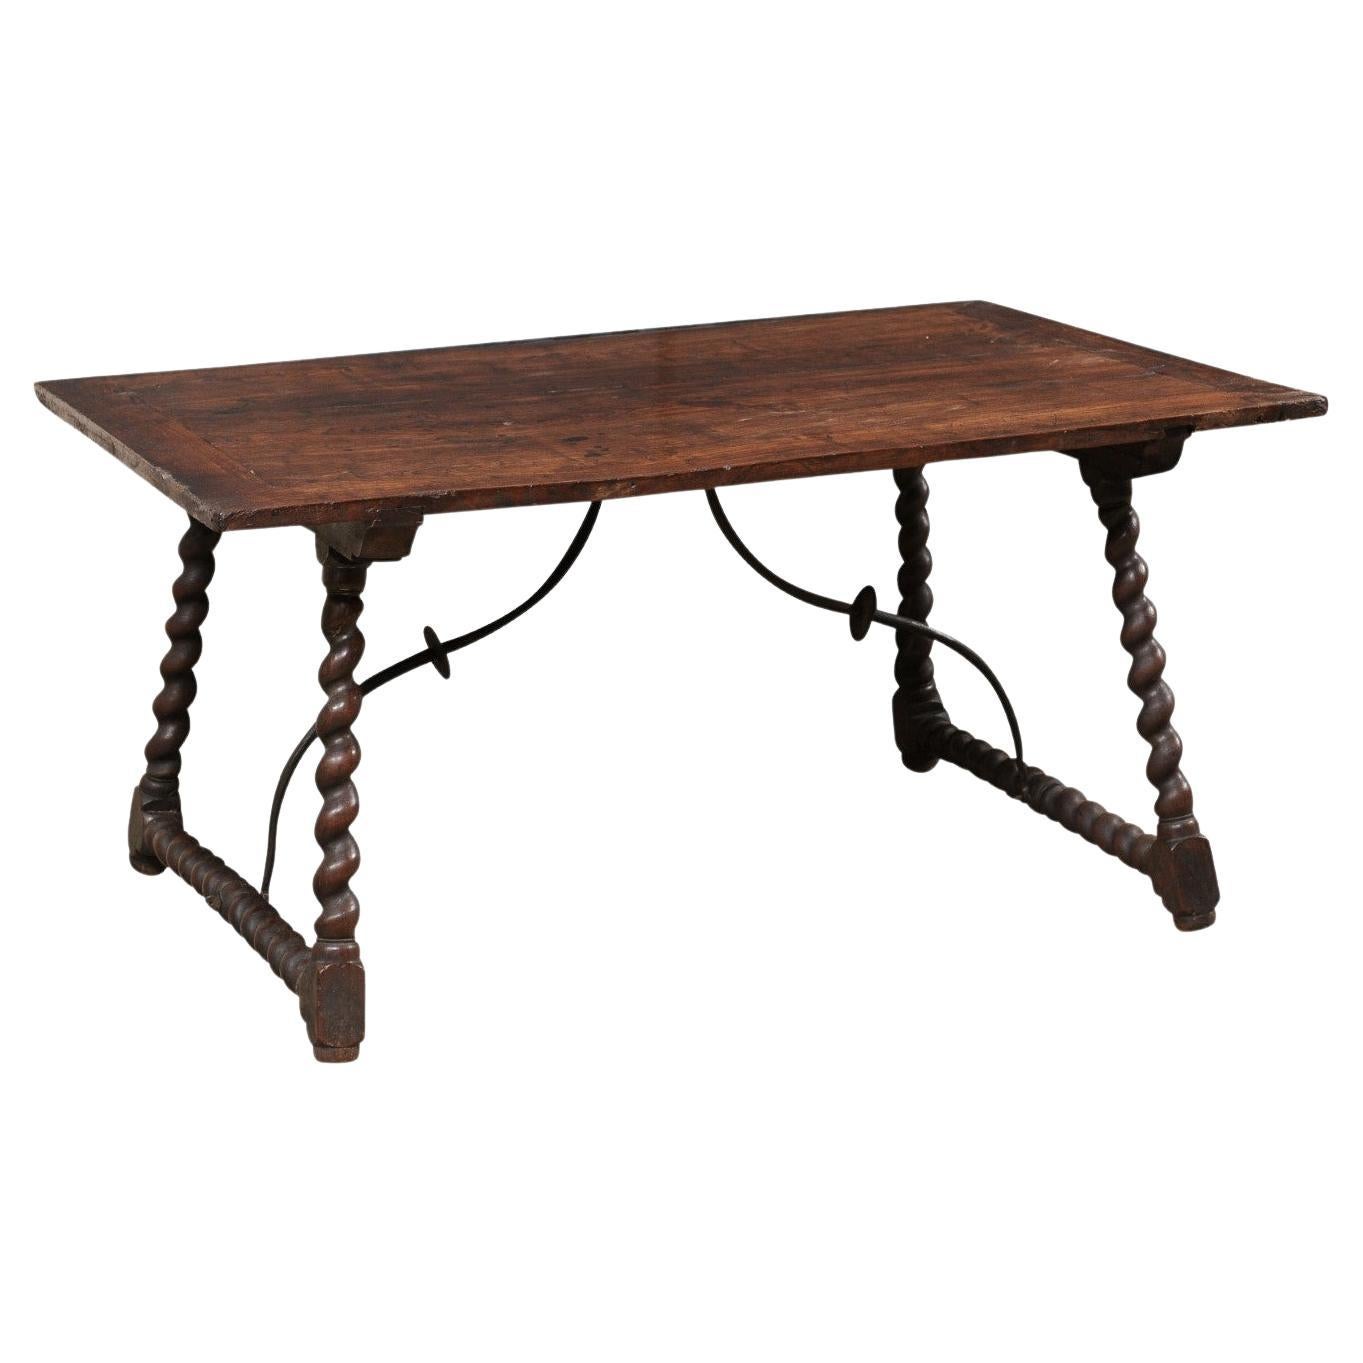 Early 18th C. Italian Table w/Forged Iron Stretcher and Barely-Twist Legs